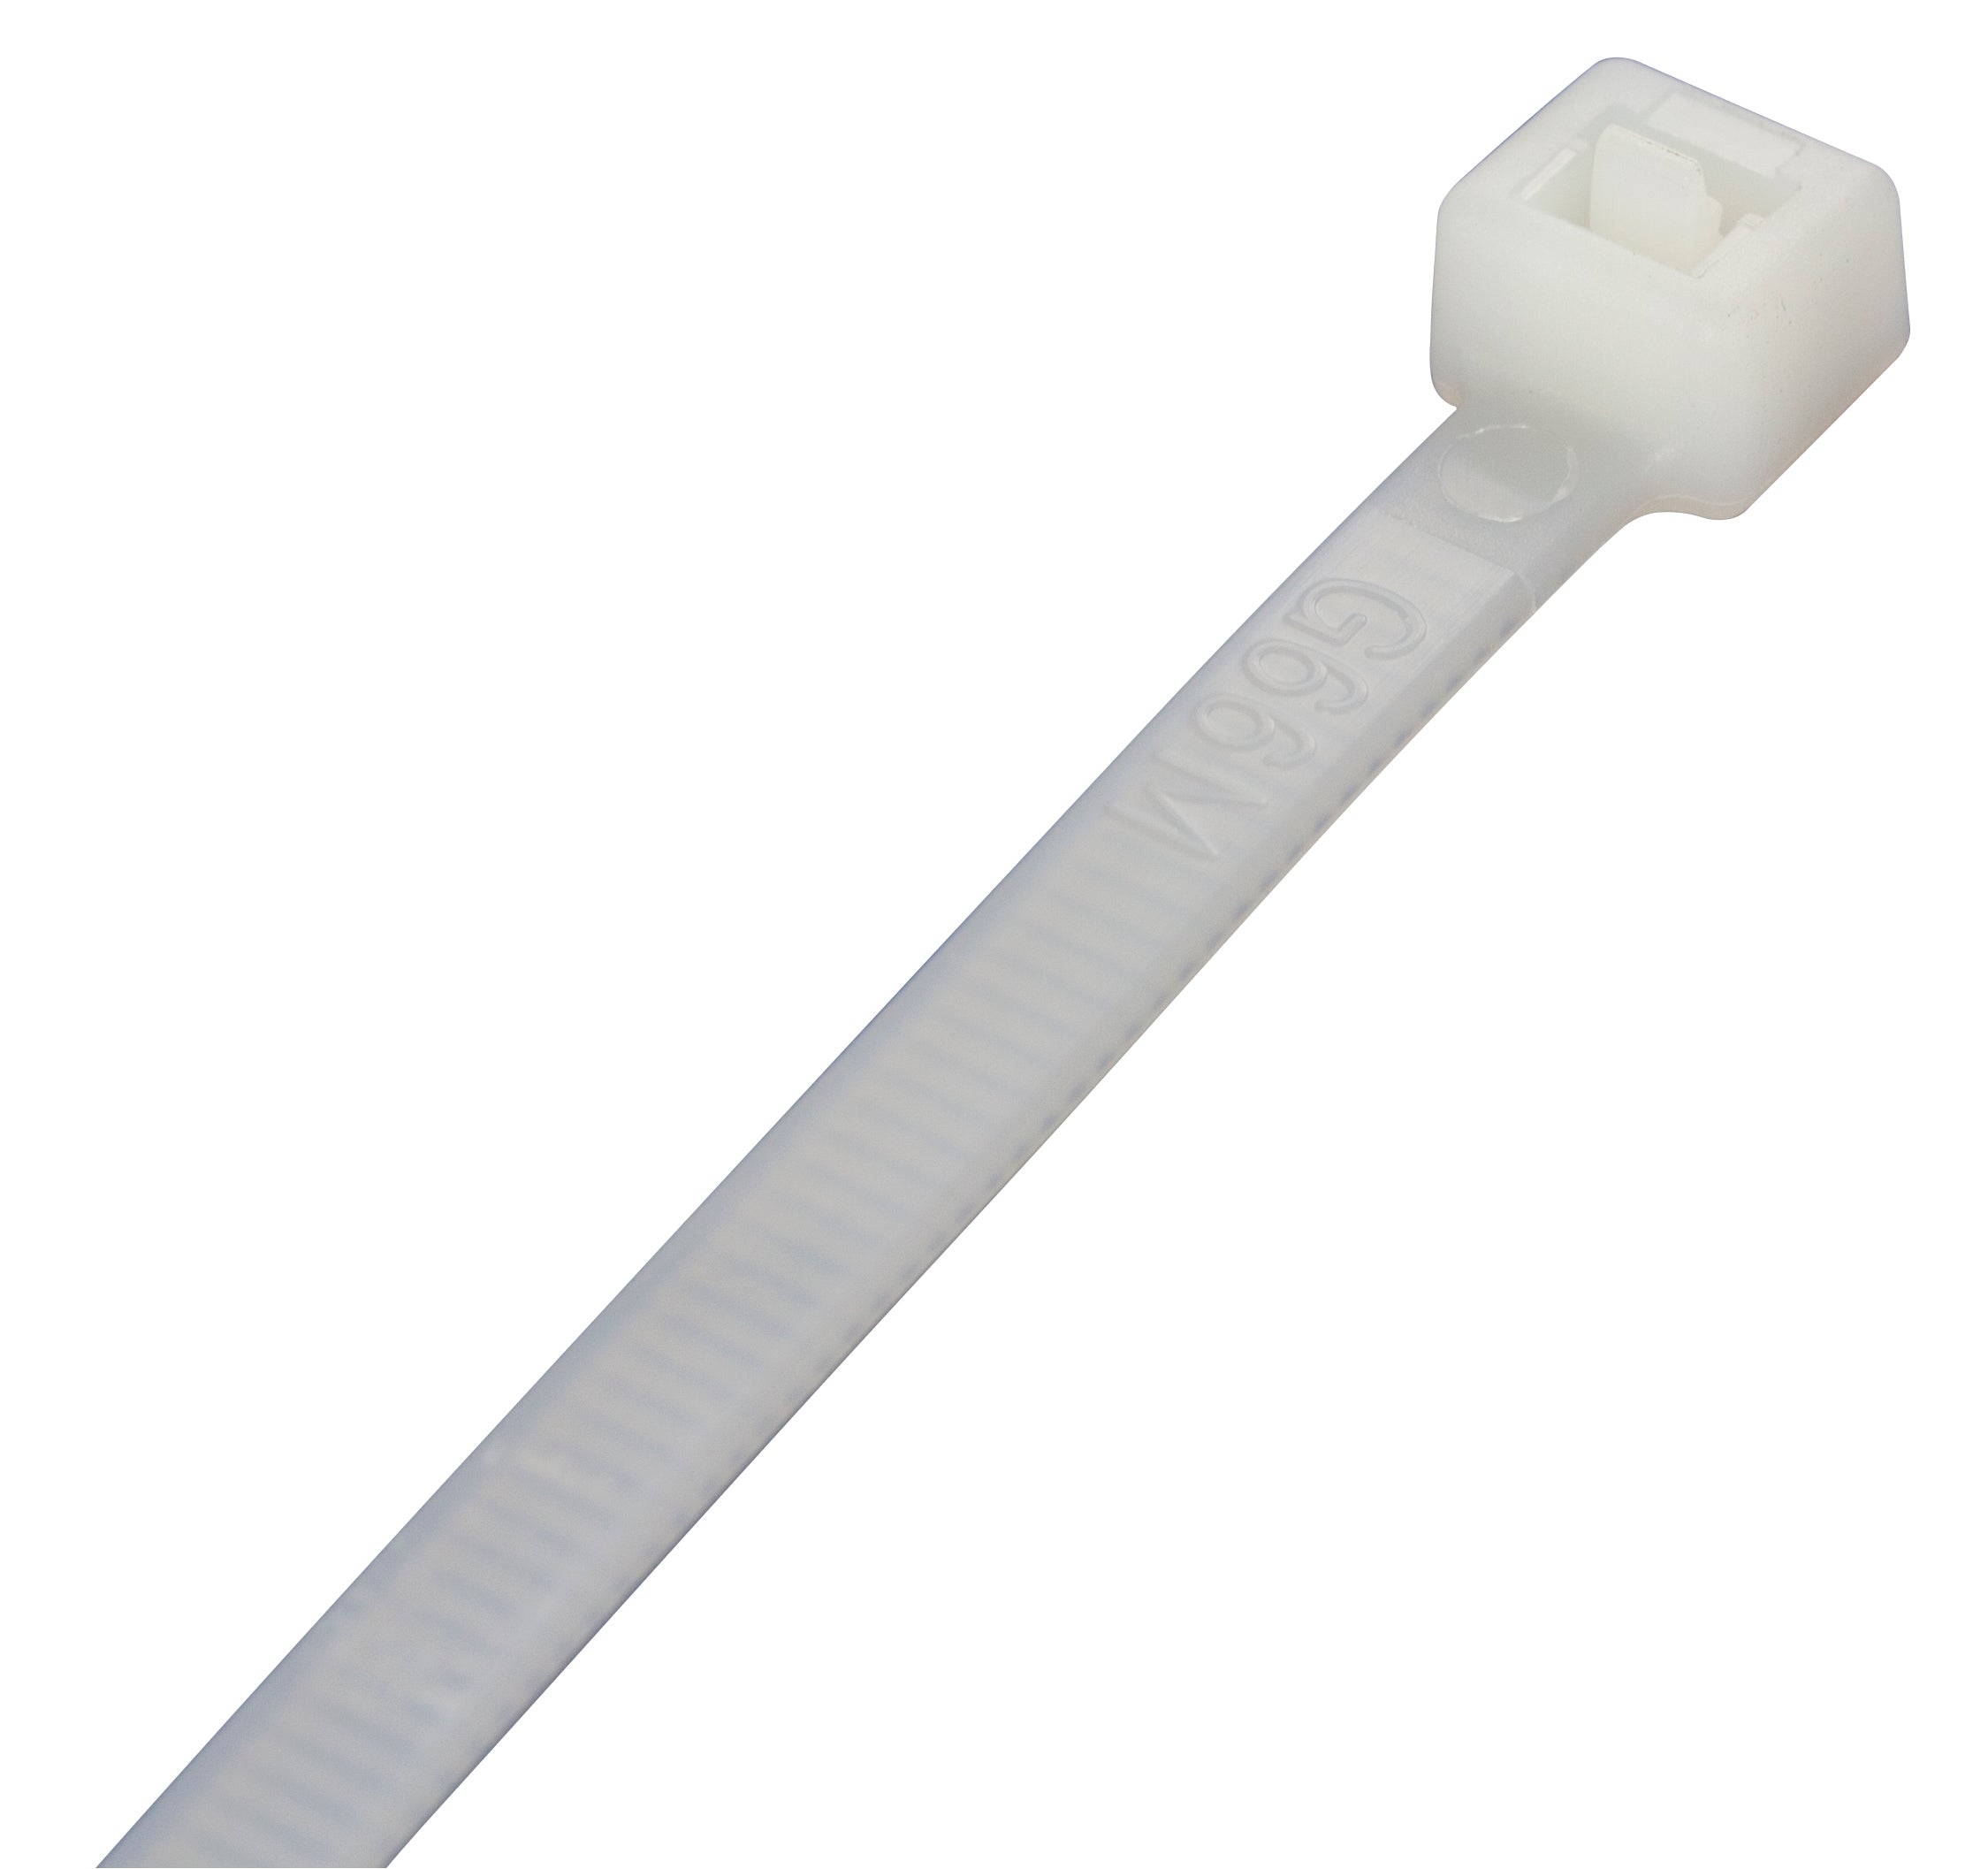 Premium Natural Cable Ties 150mm x 7.6mm - Pack of 100